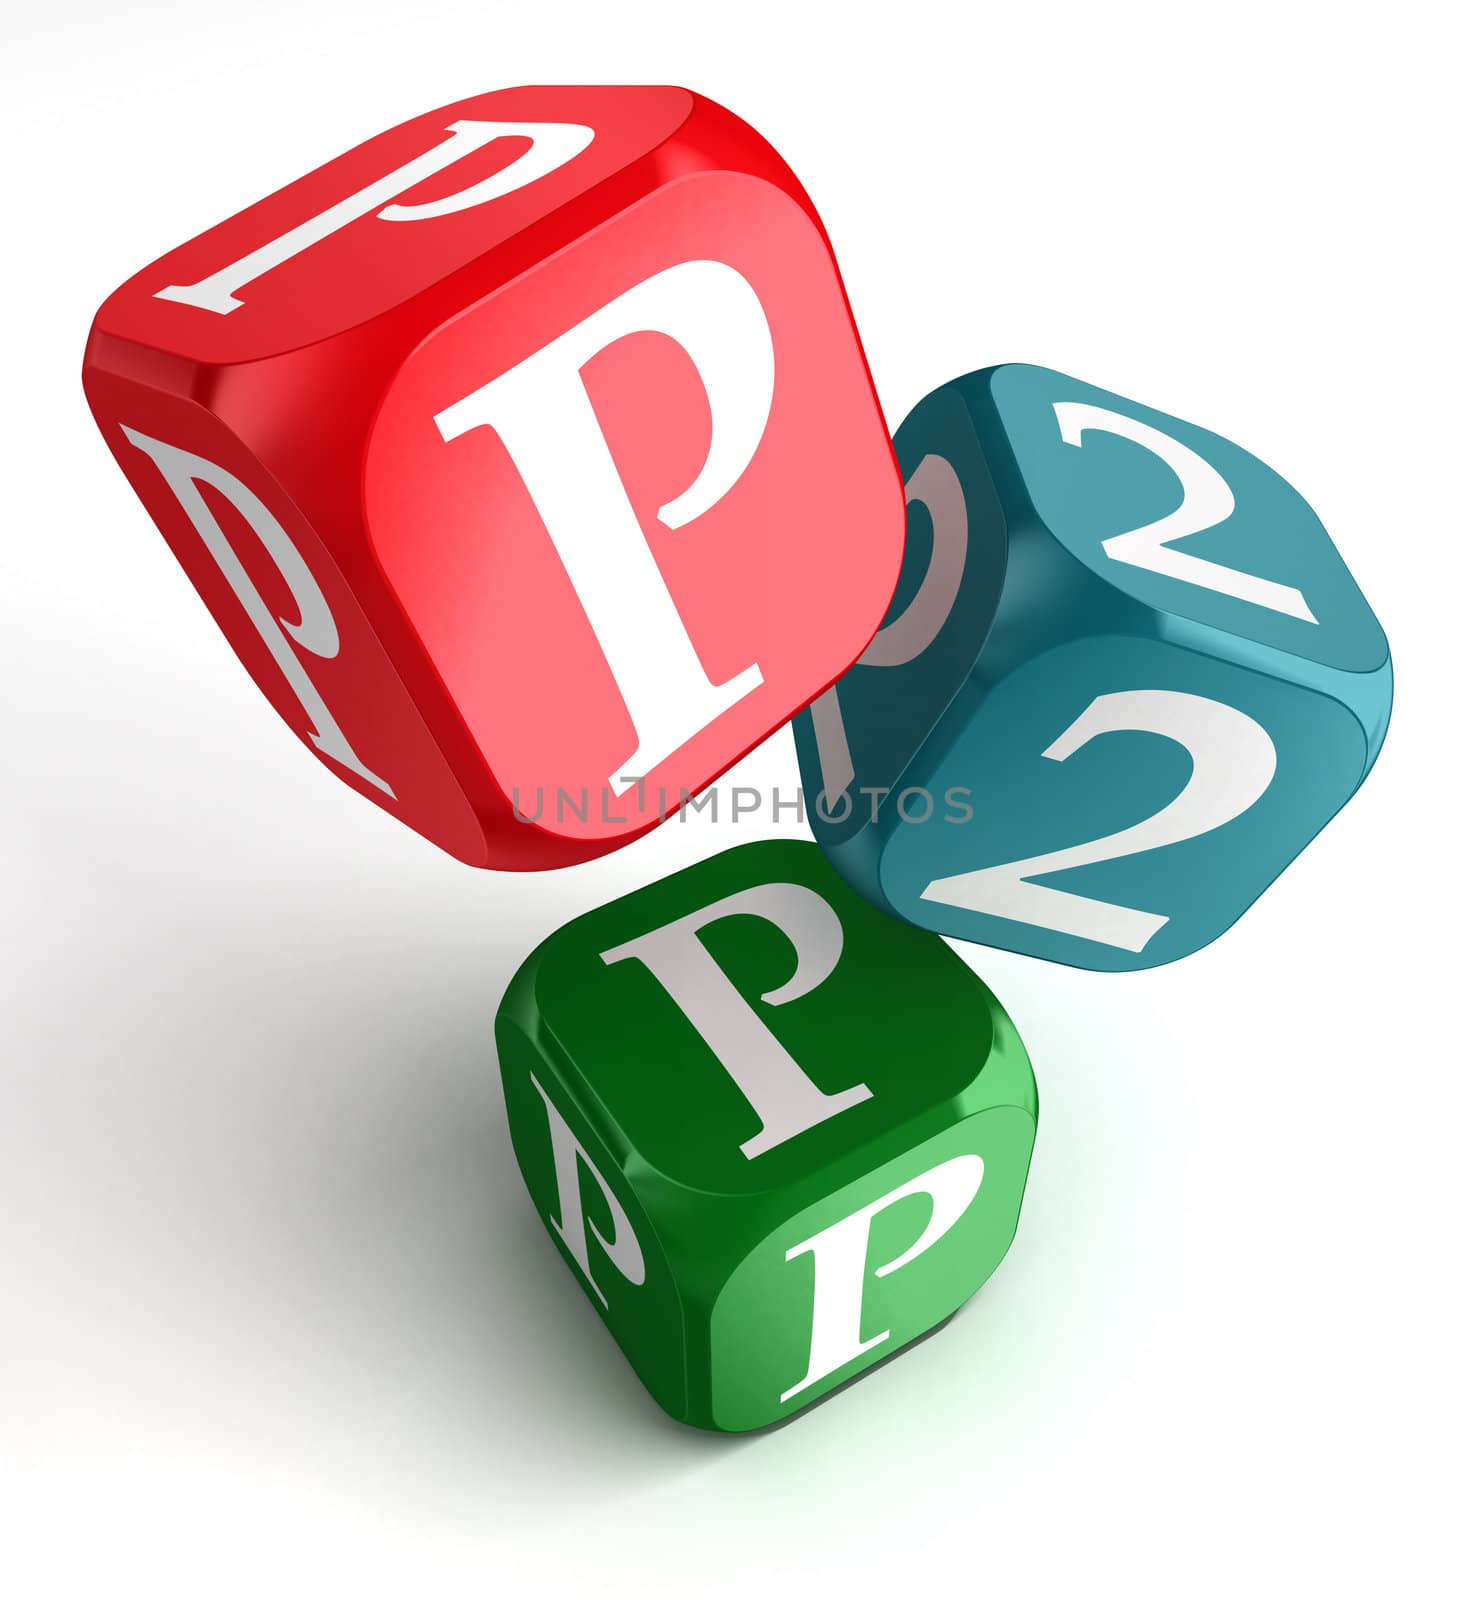 p2p word on red blue and green dice cube on white background